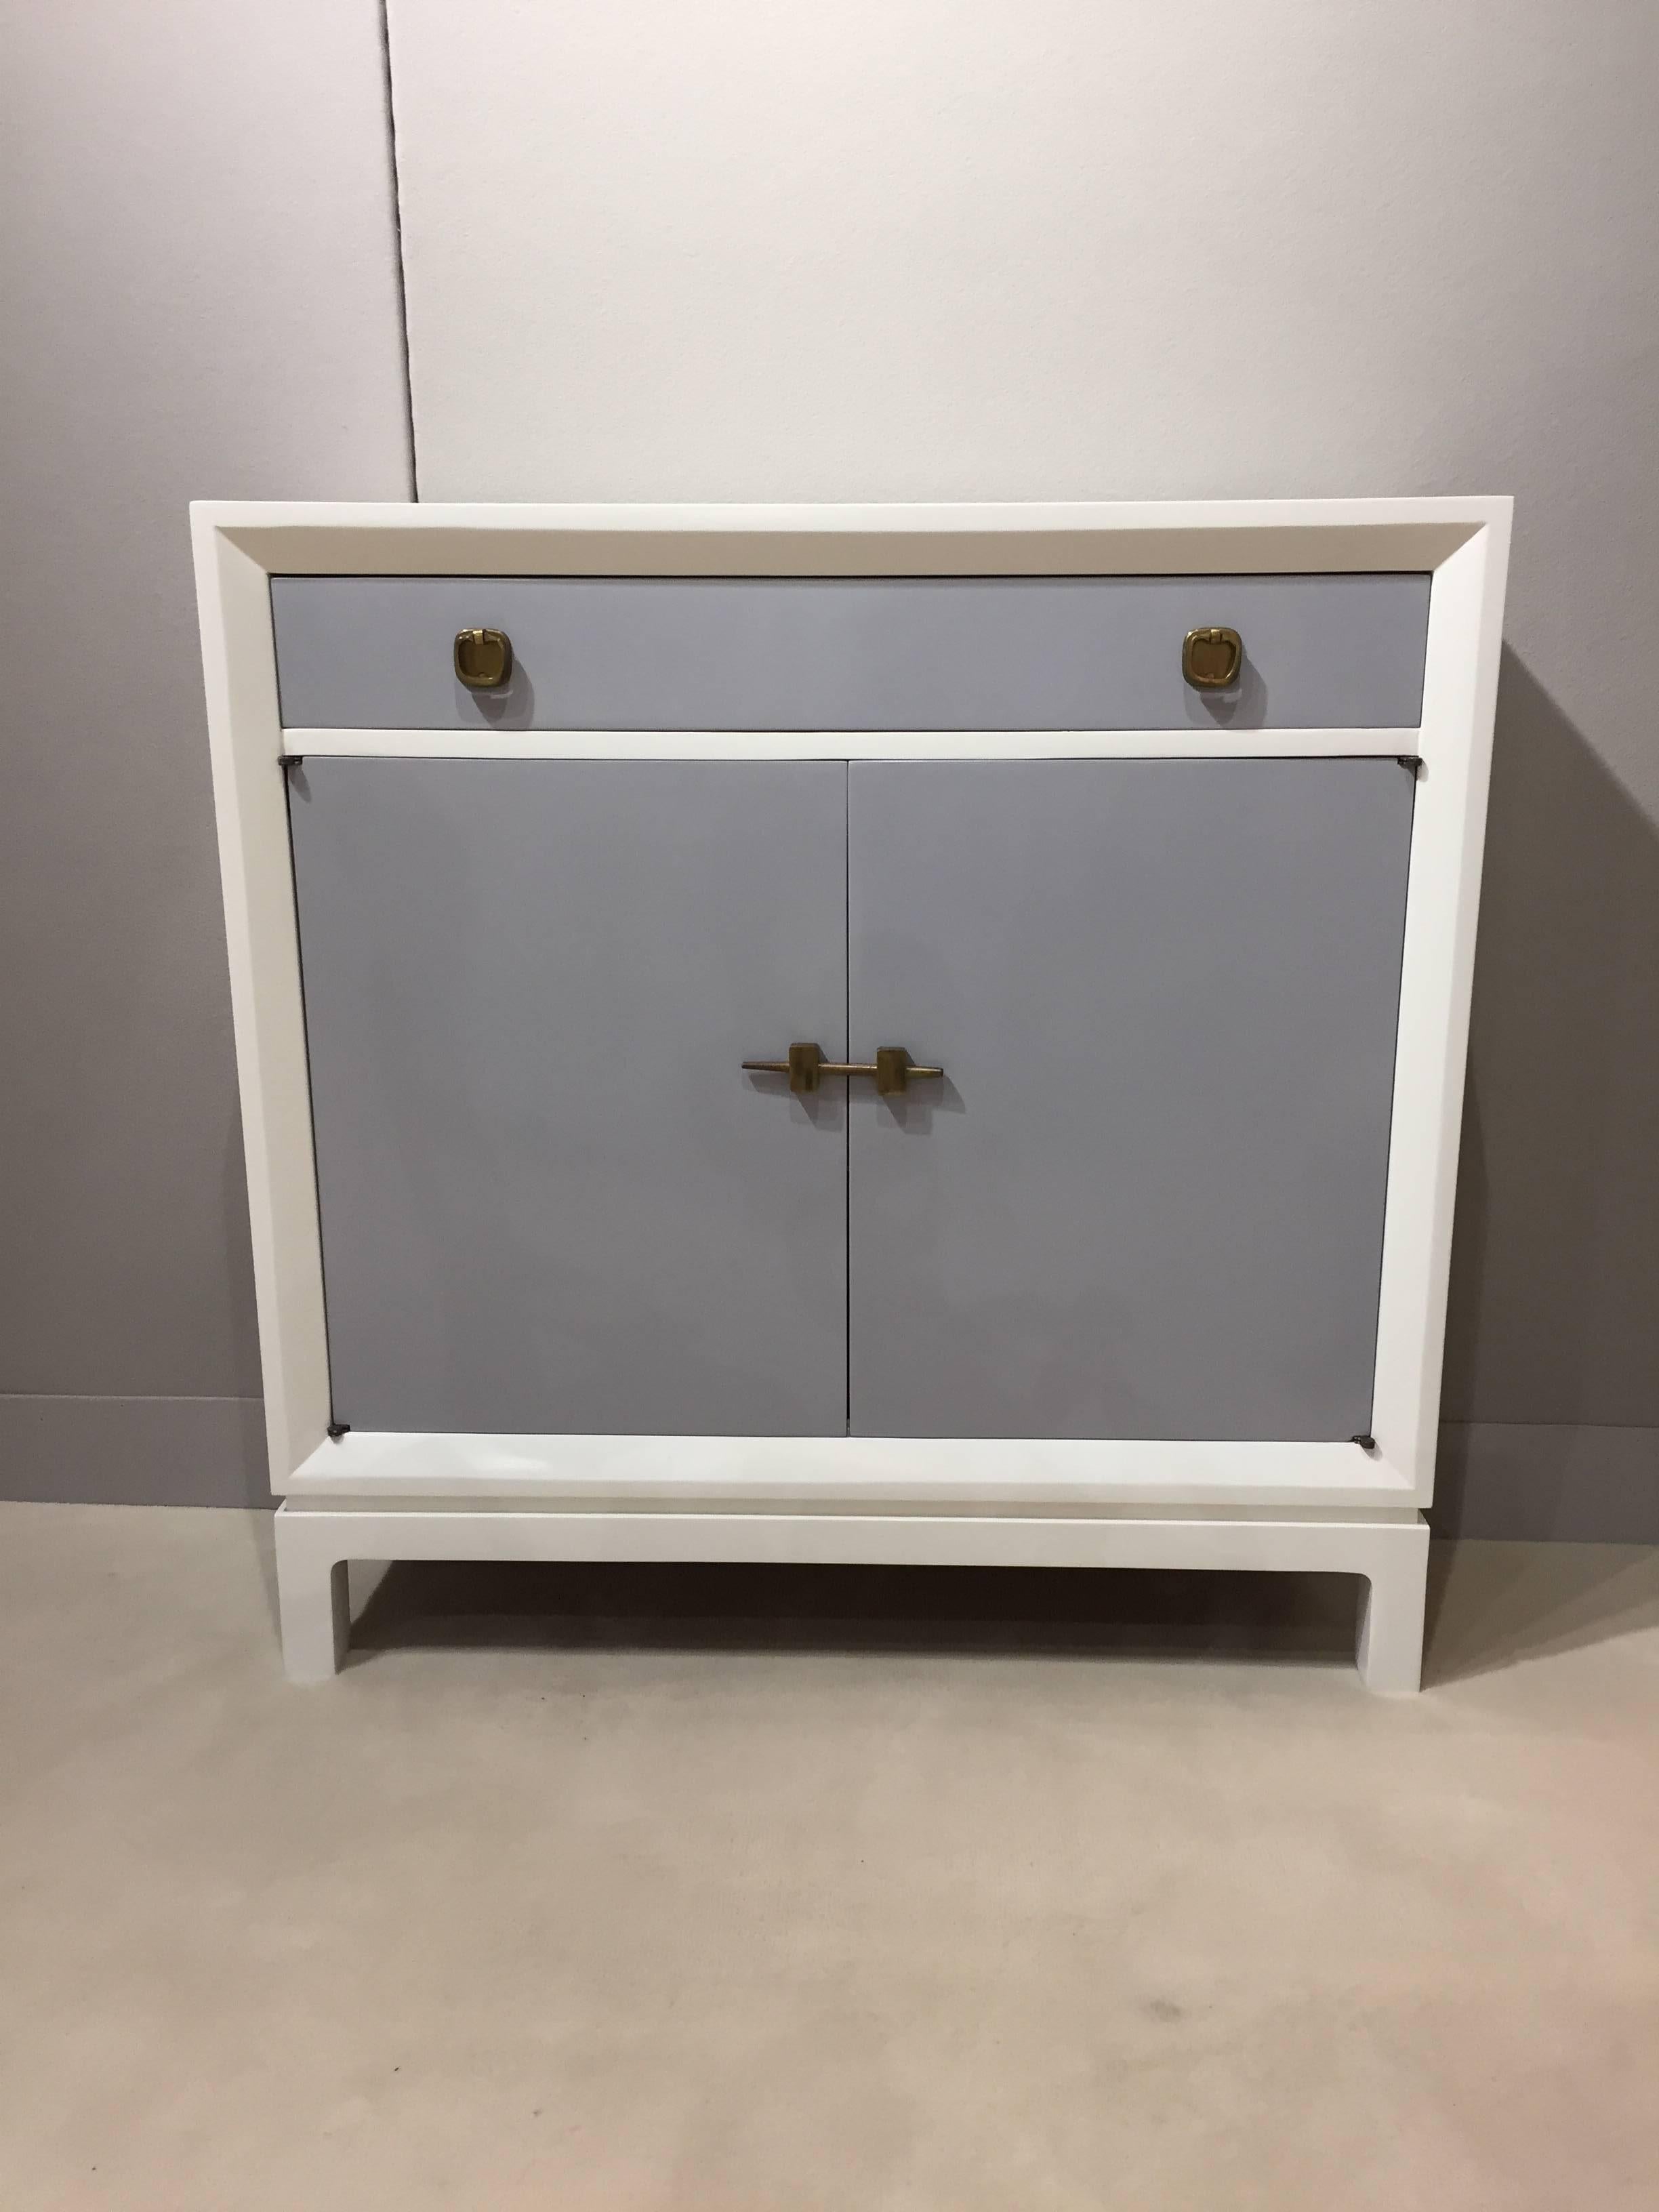 Tommi Parzinger style petite marble top grey and white lacquer bronze mount cabinet , with draw and two door storage compartment with shelf, wonderful entrance piece/ bathroom custom quality piece.